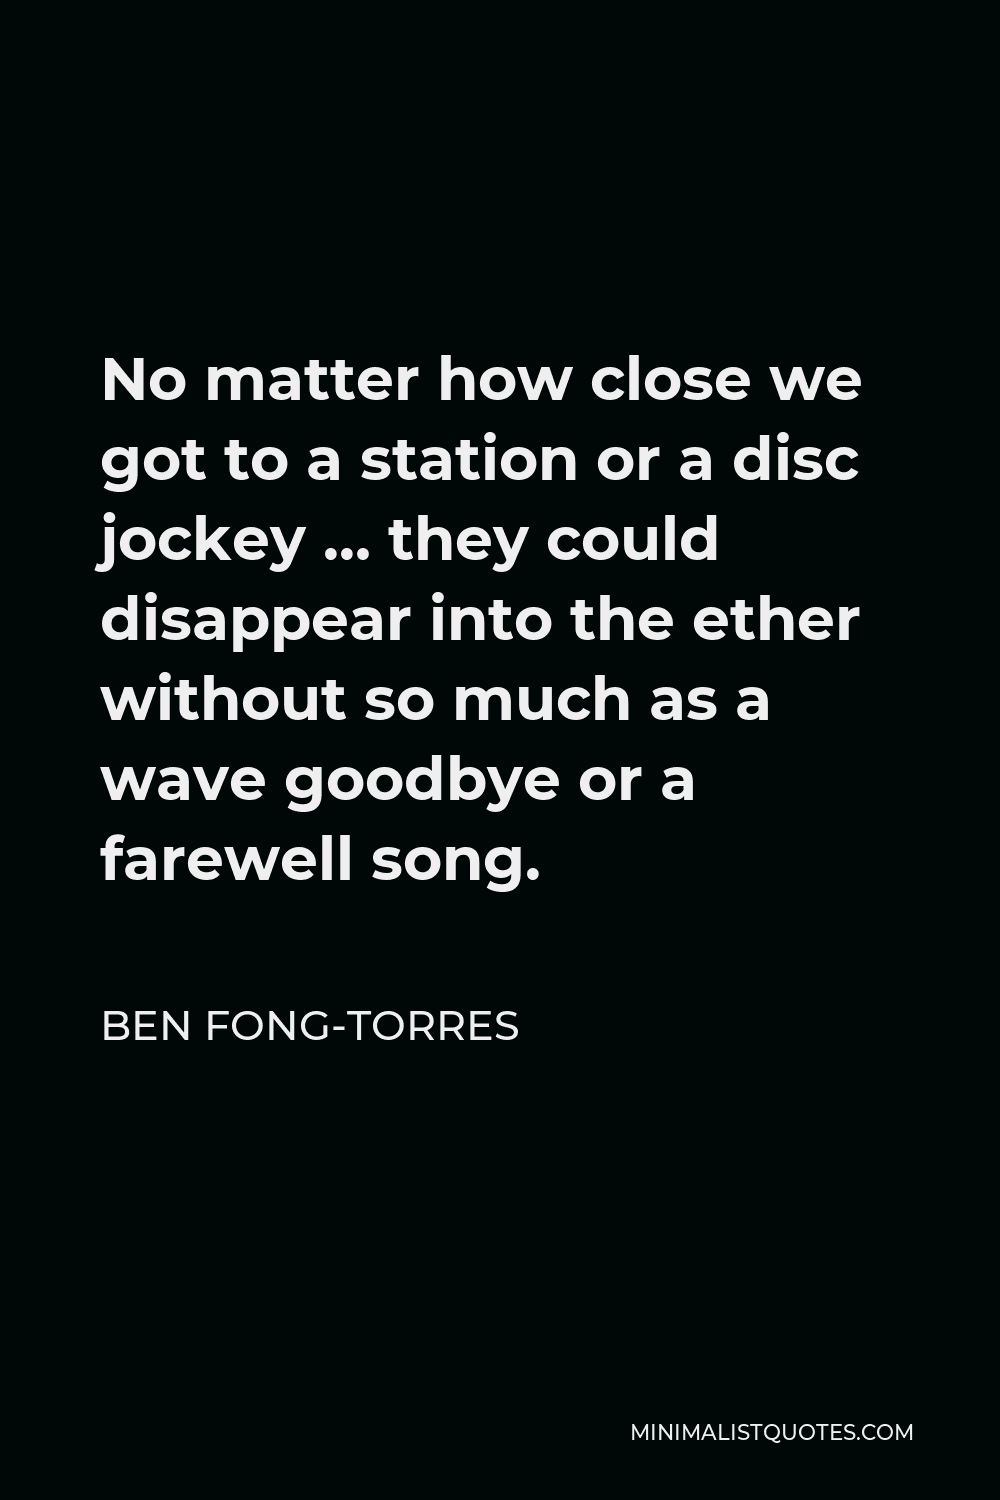 Ben Fong-Torres Quote - No matter how close we got to a station or a disc jockey … they could disappear into the ether without so much as a wave goodbye or a farewell song.